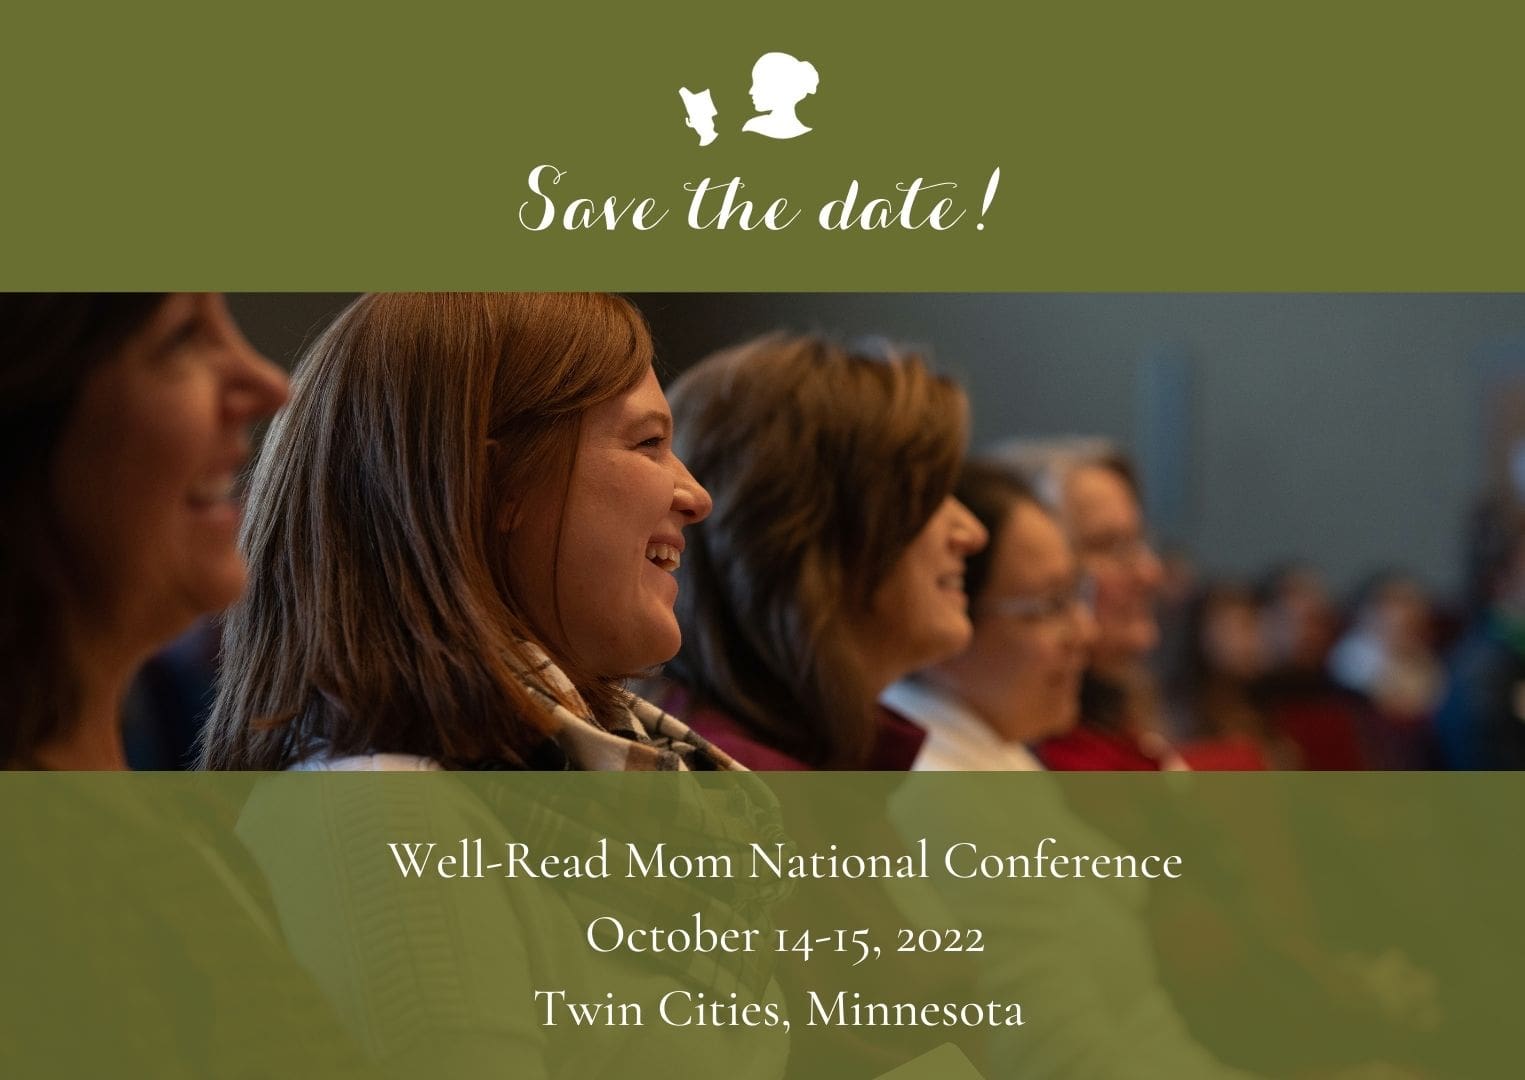 Green save the date conference jpg for website (1080 × 1525 px)